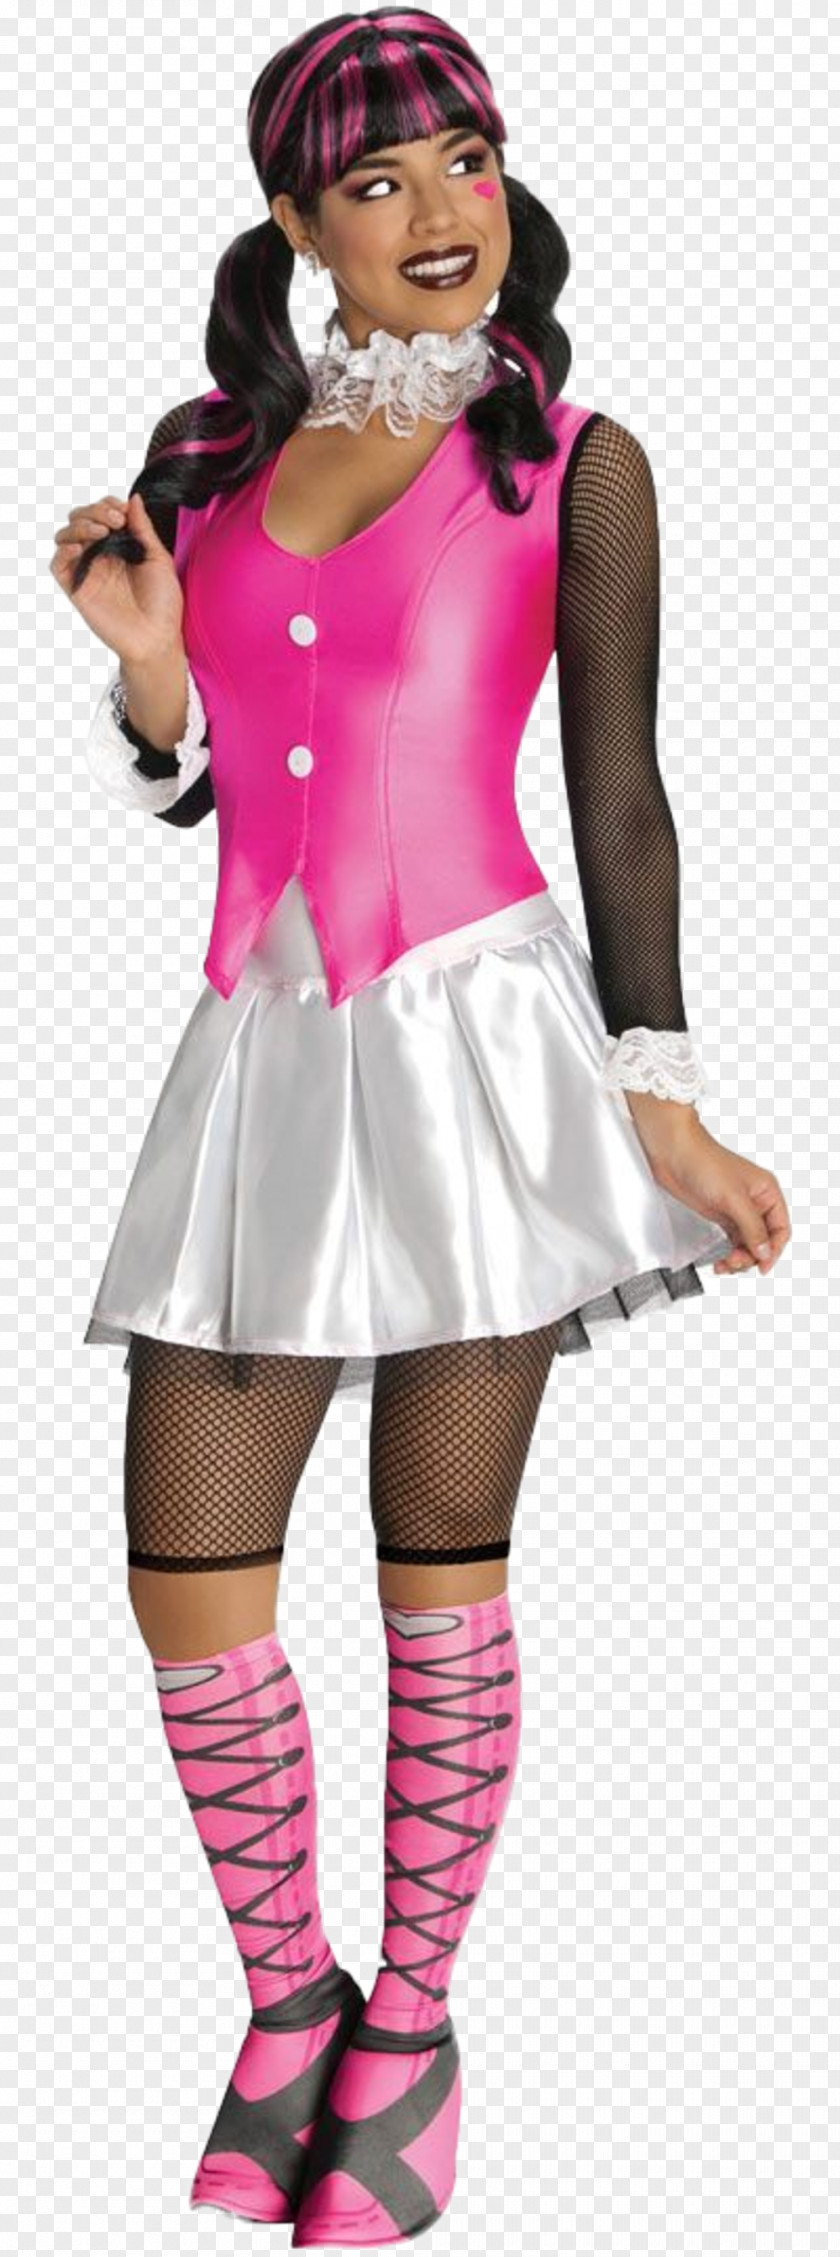 Shirt The House Of Costumes / La Casa De Los Trucos Monster High BuyCostumes.com Costume Party PNG